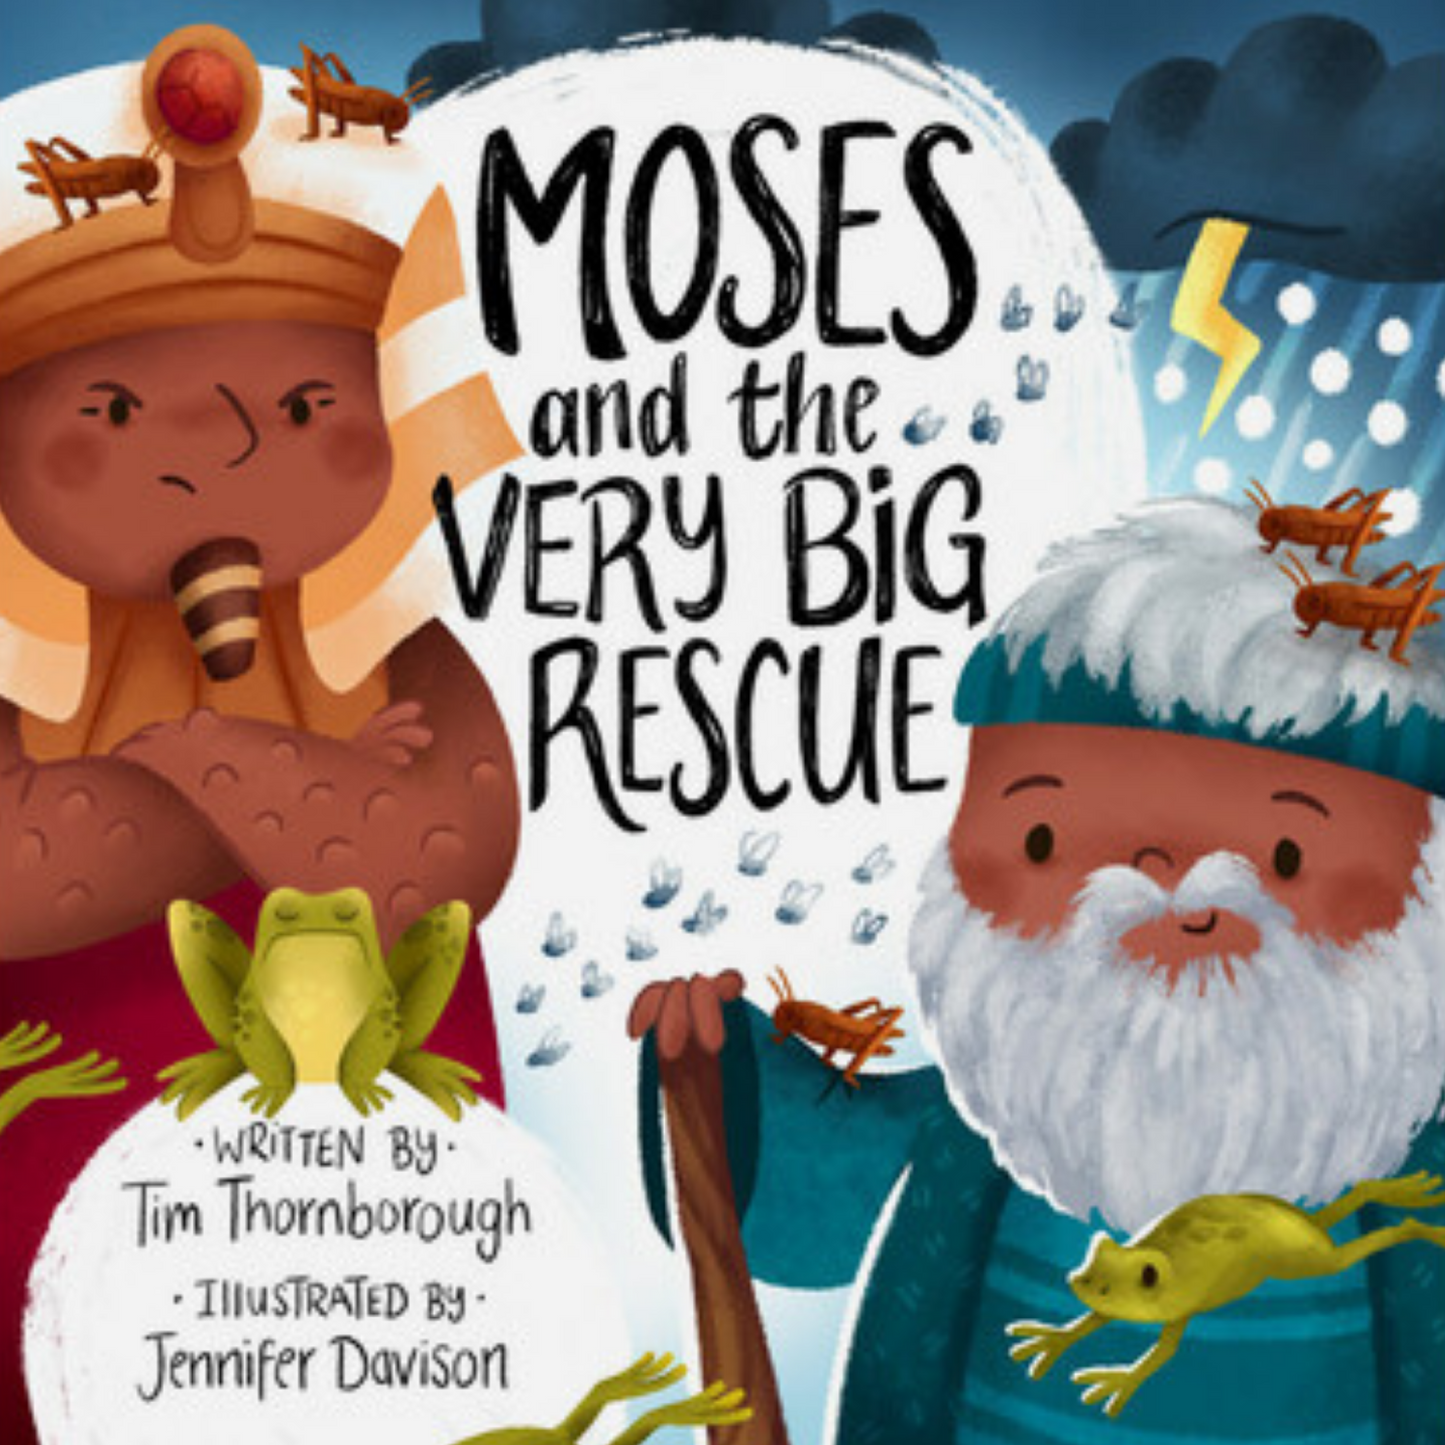 Moses and the very big rescue